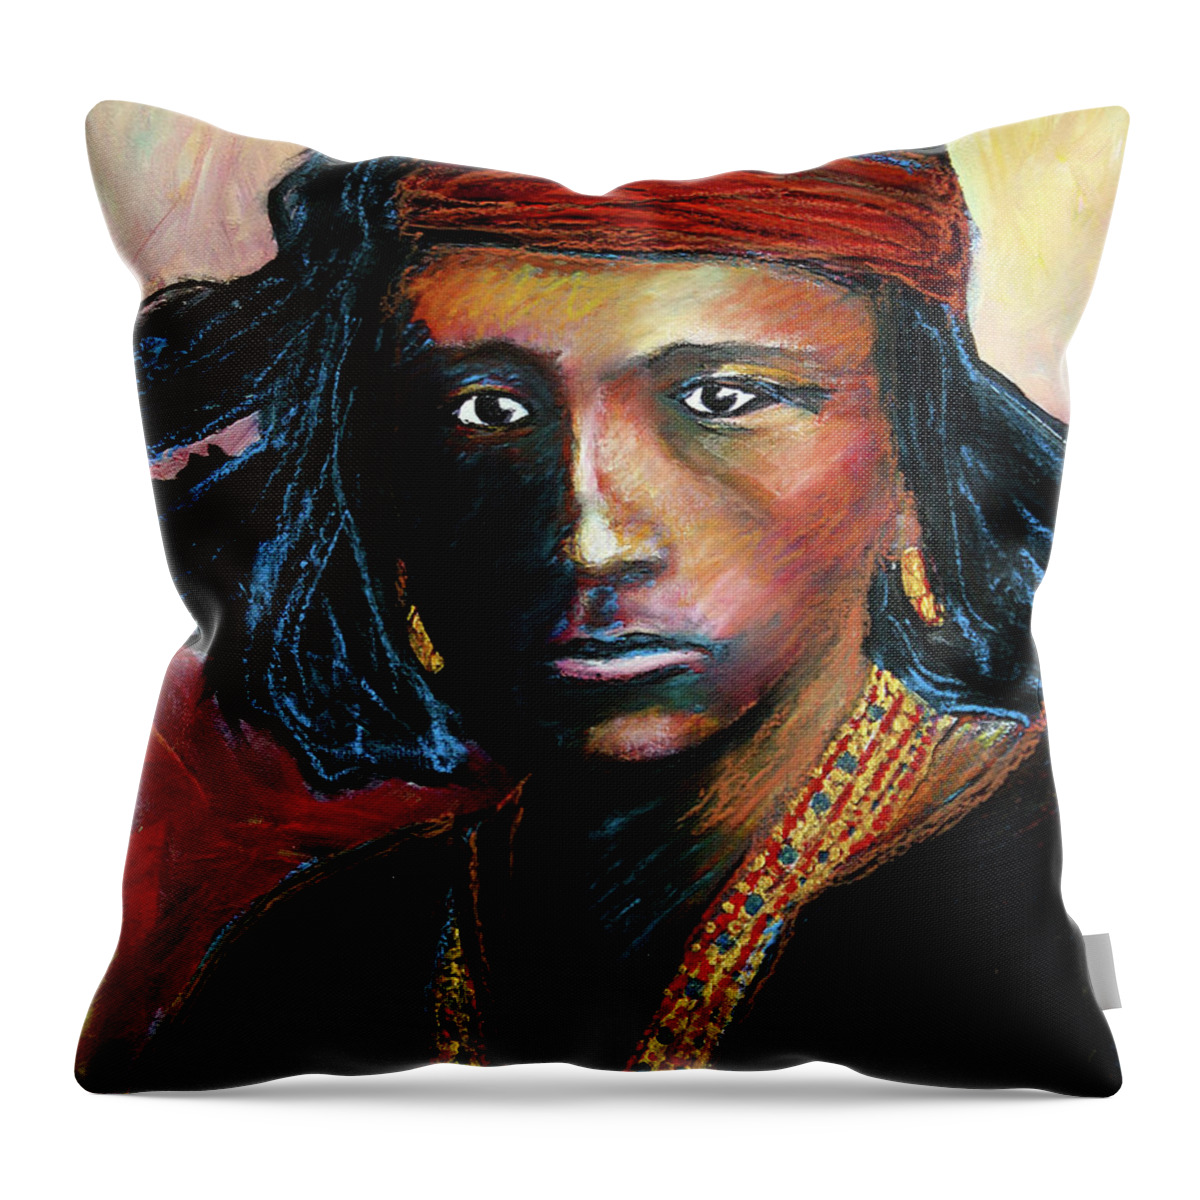 Navajo Throw Pillow featuring the painting Navajo by Frank Botello